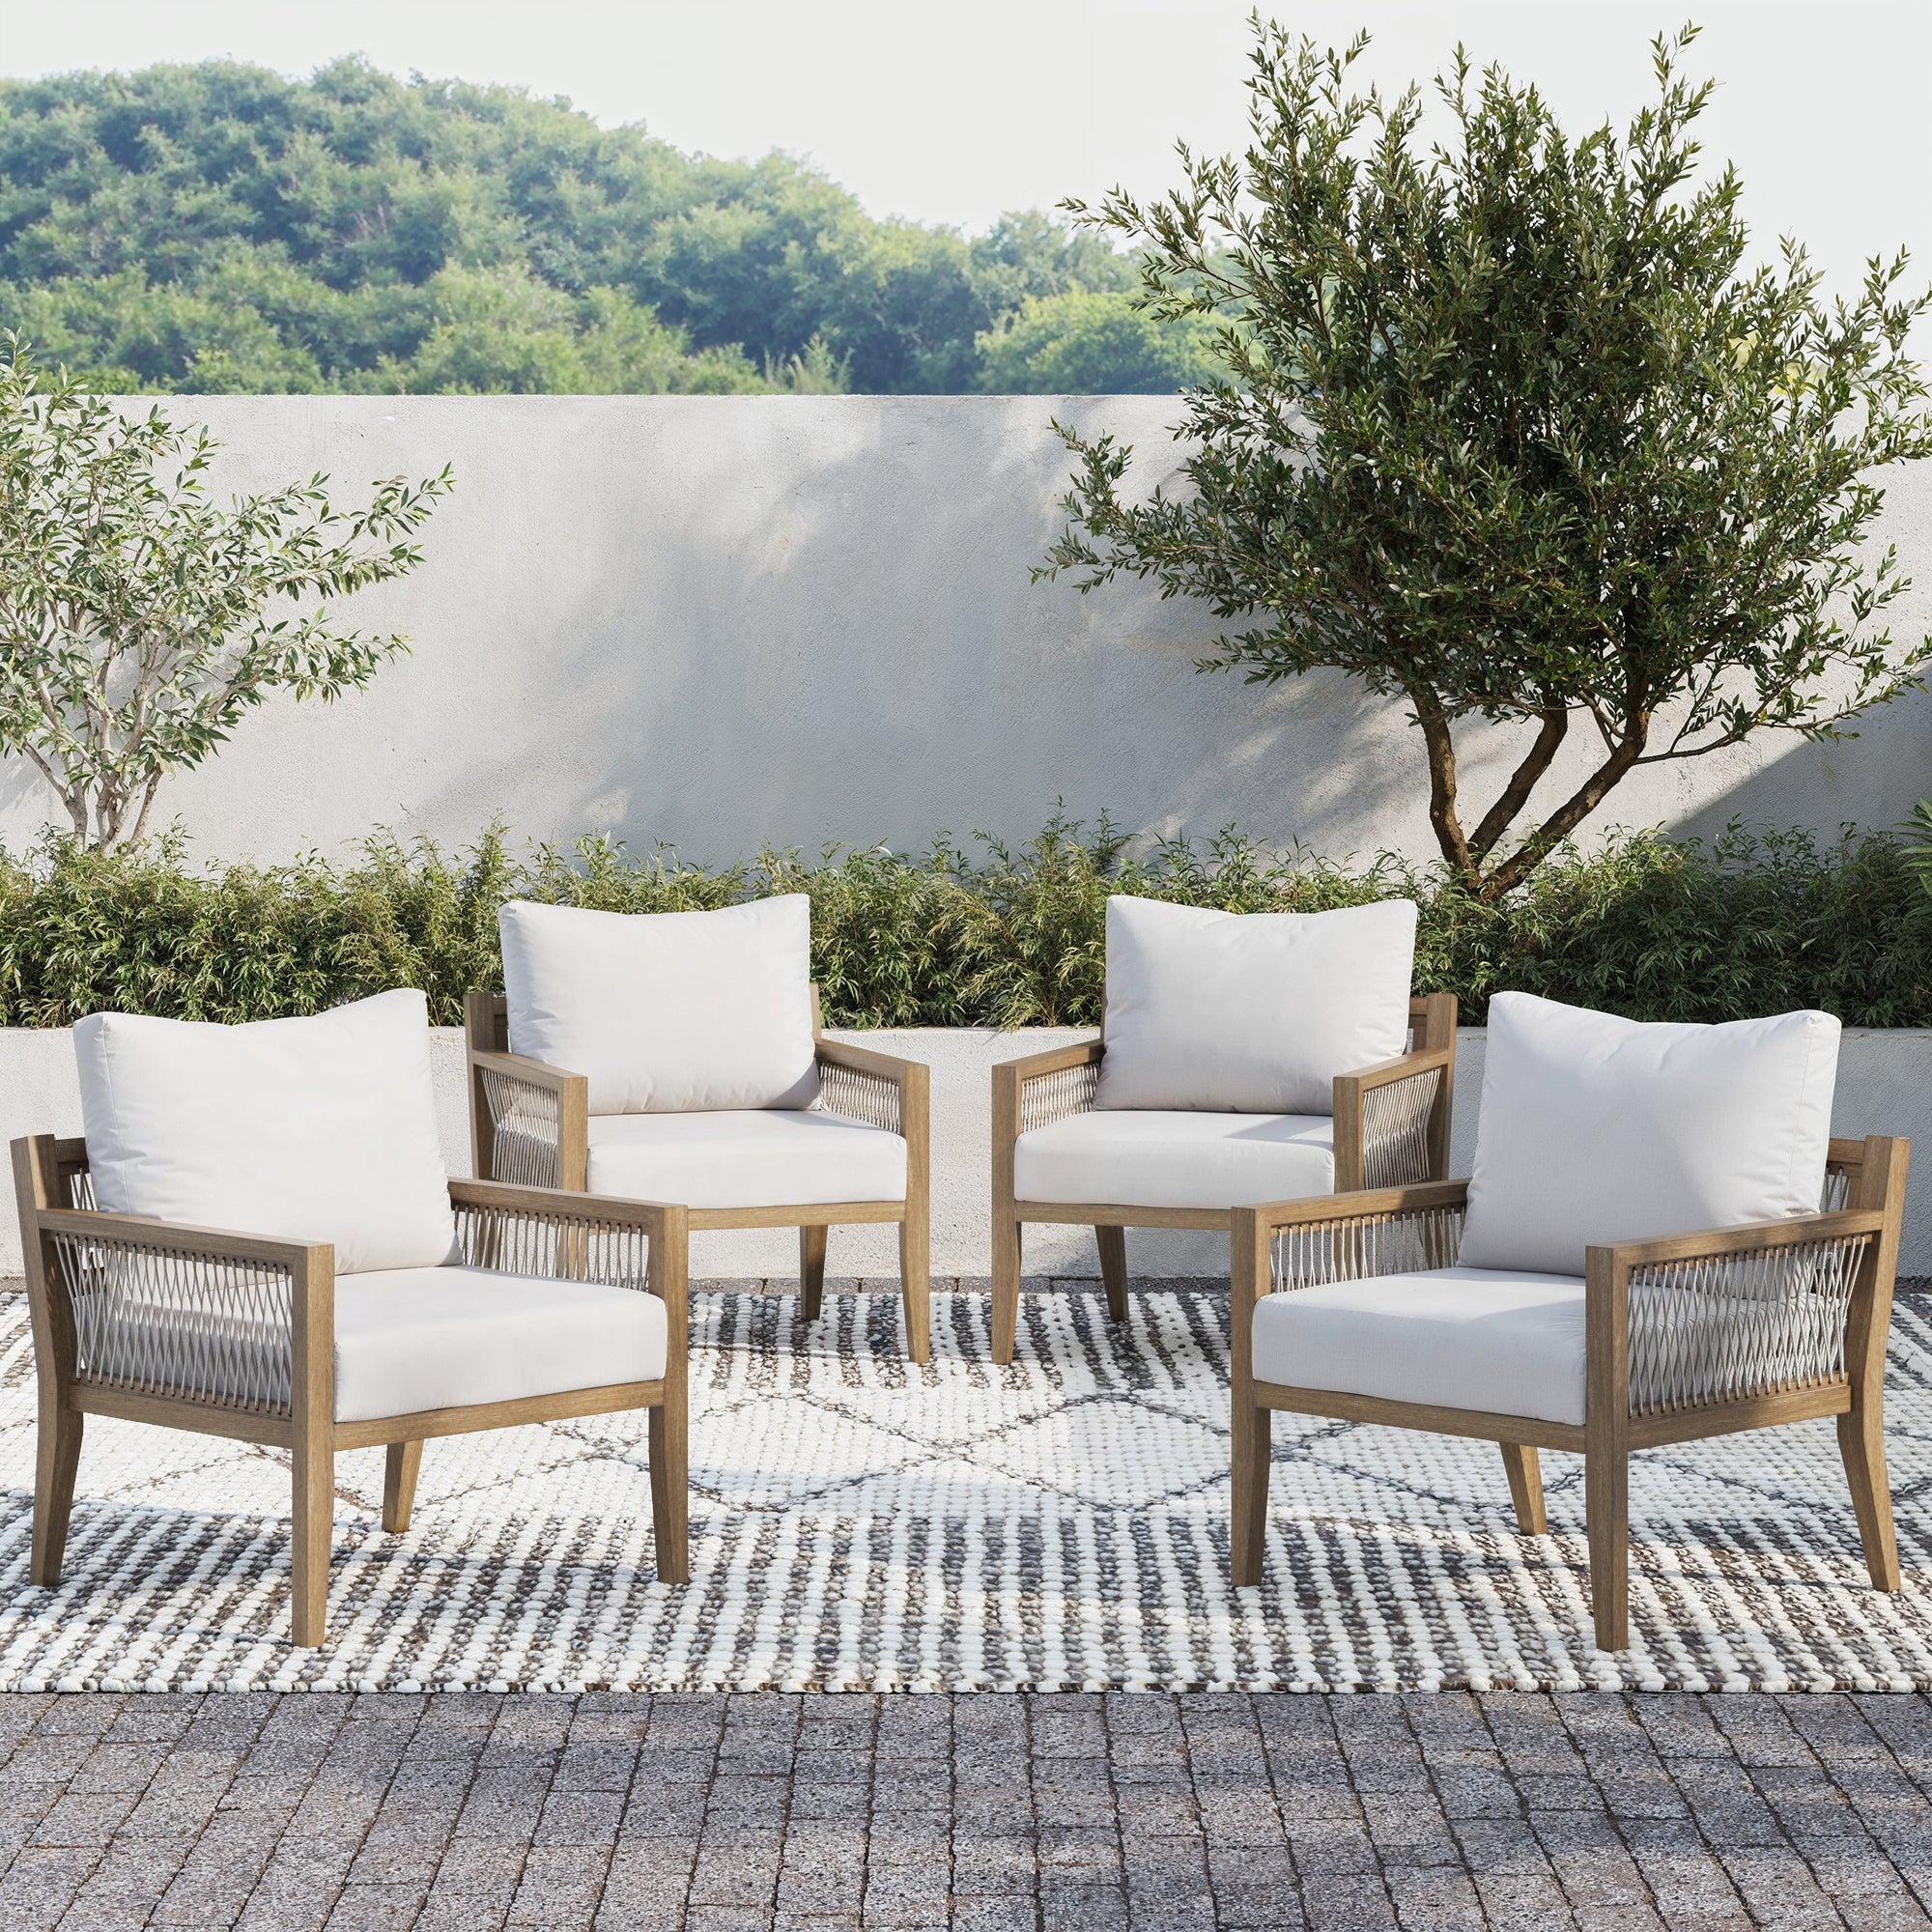 Set of 4 Outdoor Patio Arm Chairs White